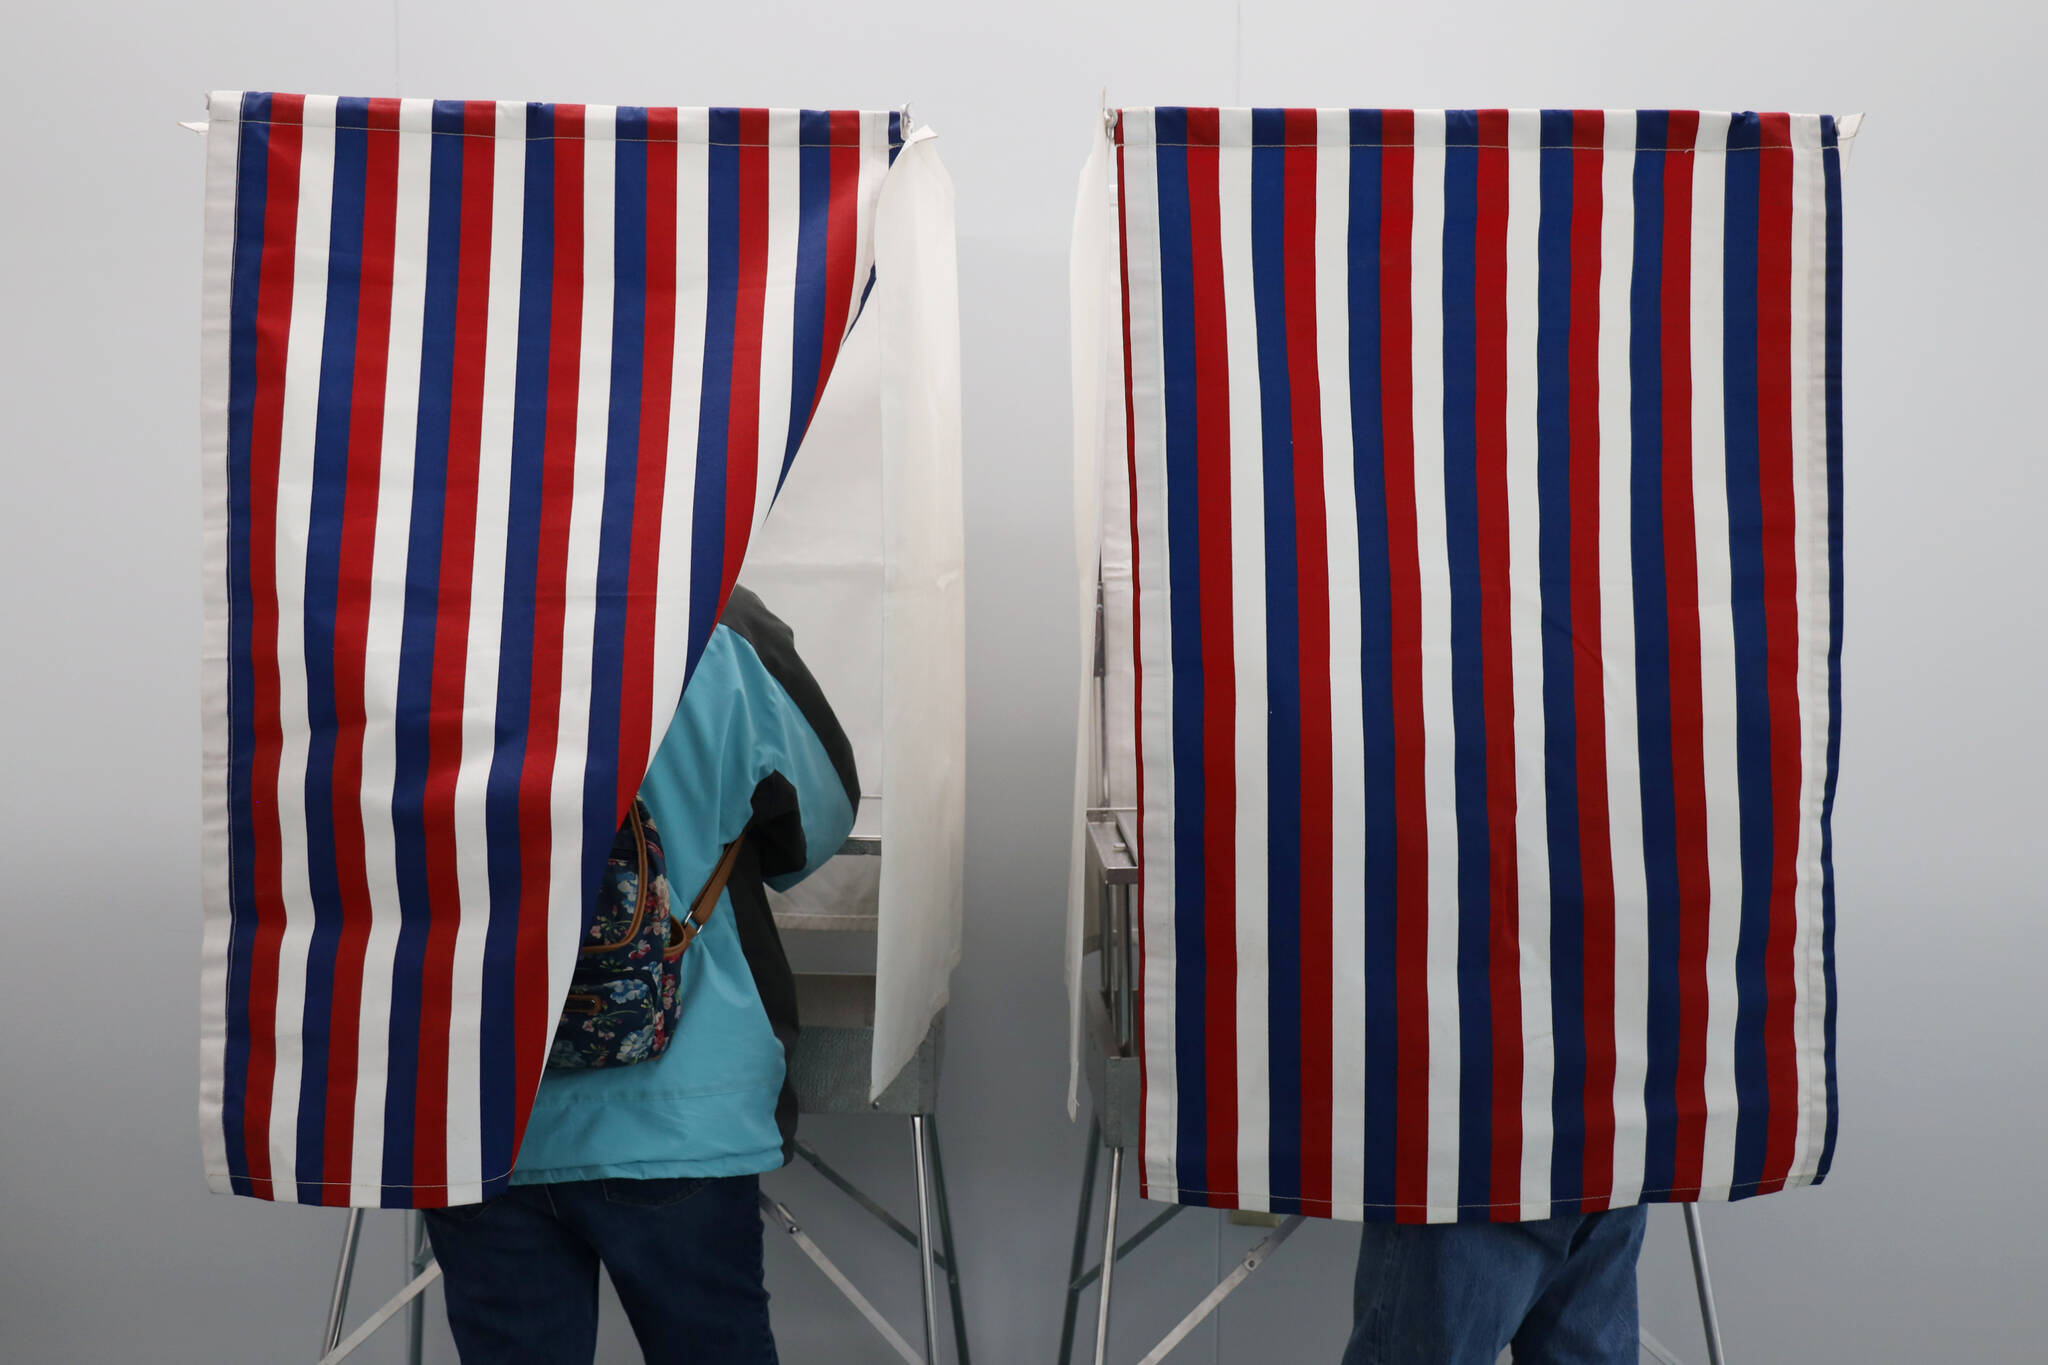 Two residents stand in voter booths Monday morning which marked the start for early and absentee in-person voting across the state for the Nov. 8 general election. (Clarise Larson / Juneau Empire)